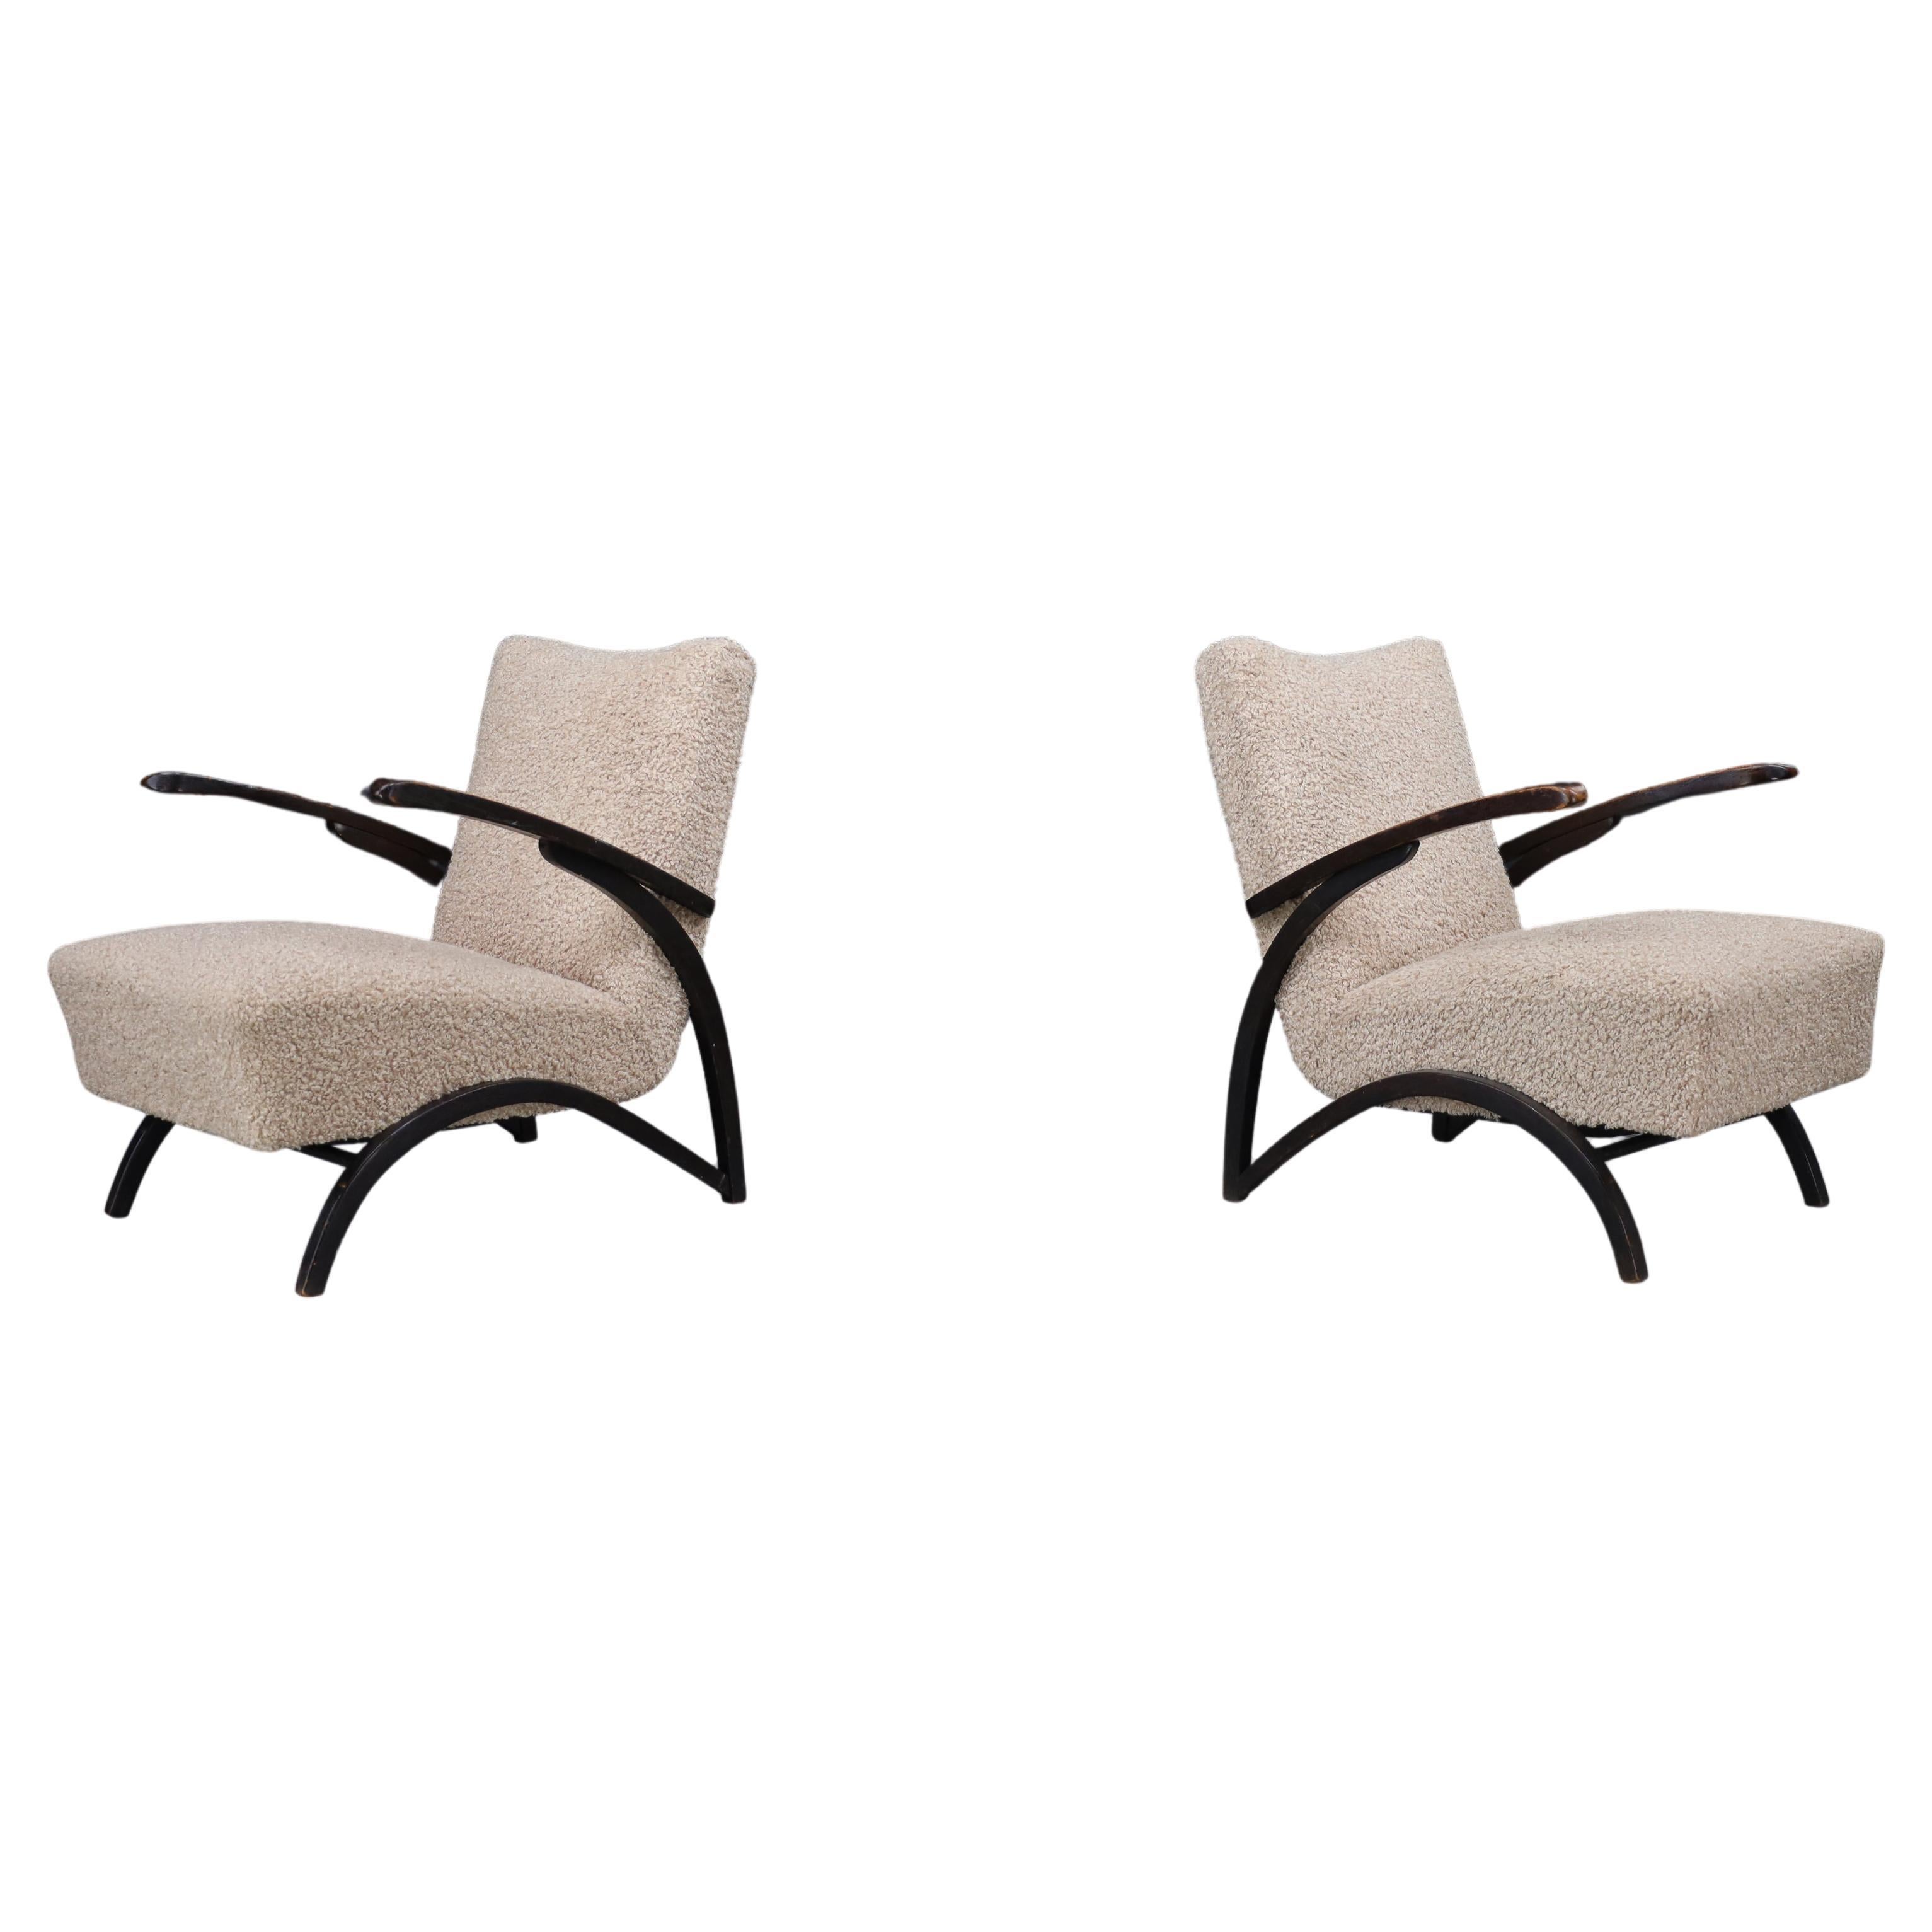 Jindrich Halabala Lounge Chairs in Teddy  Upholstery Czech Republic 1930.  For Sale